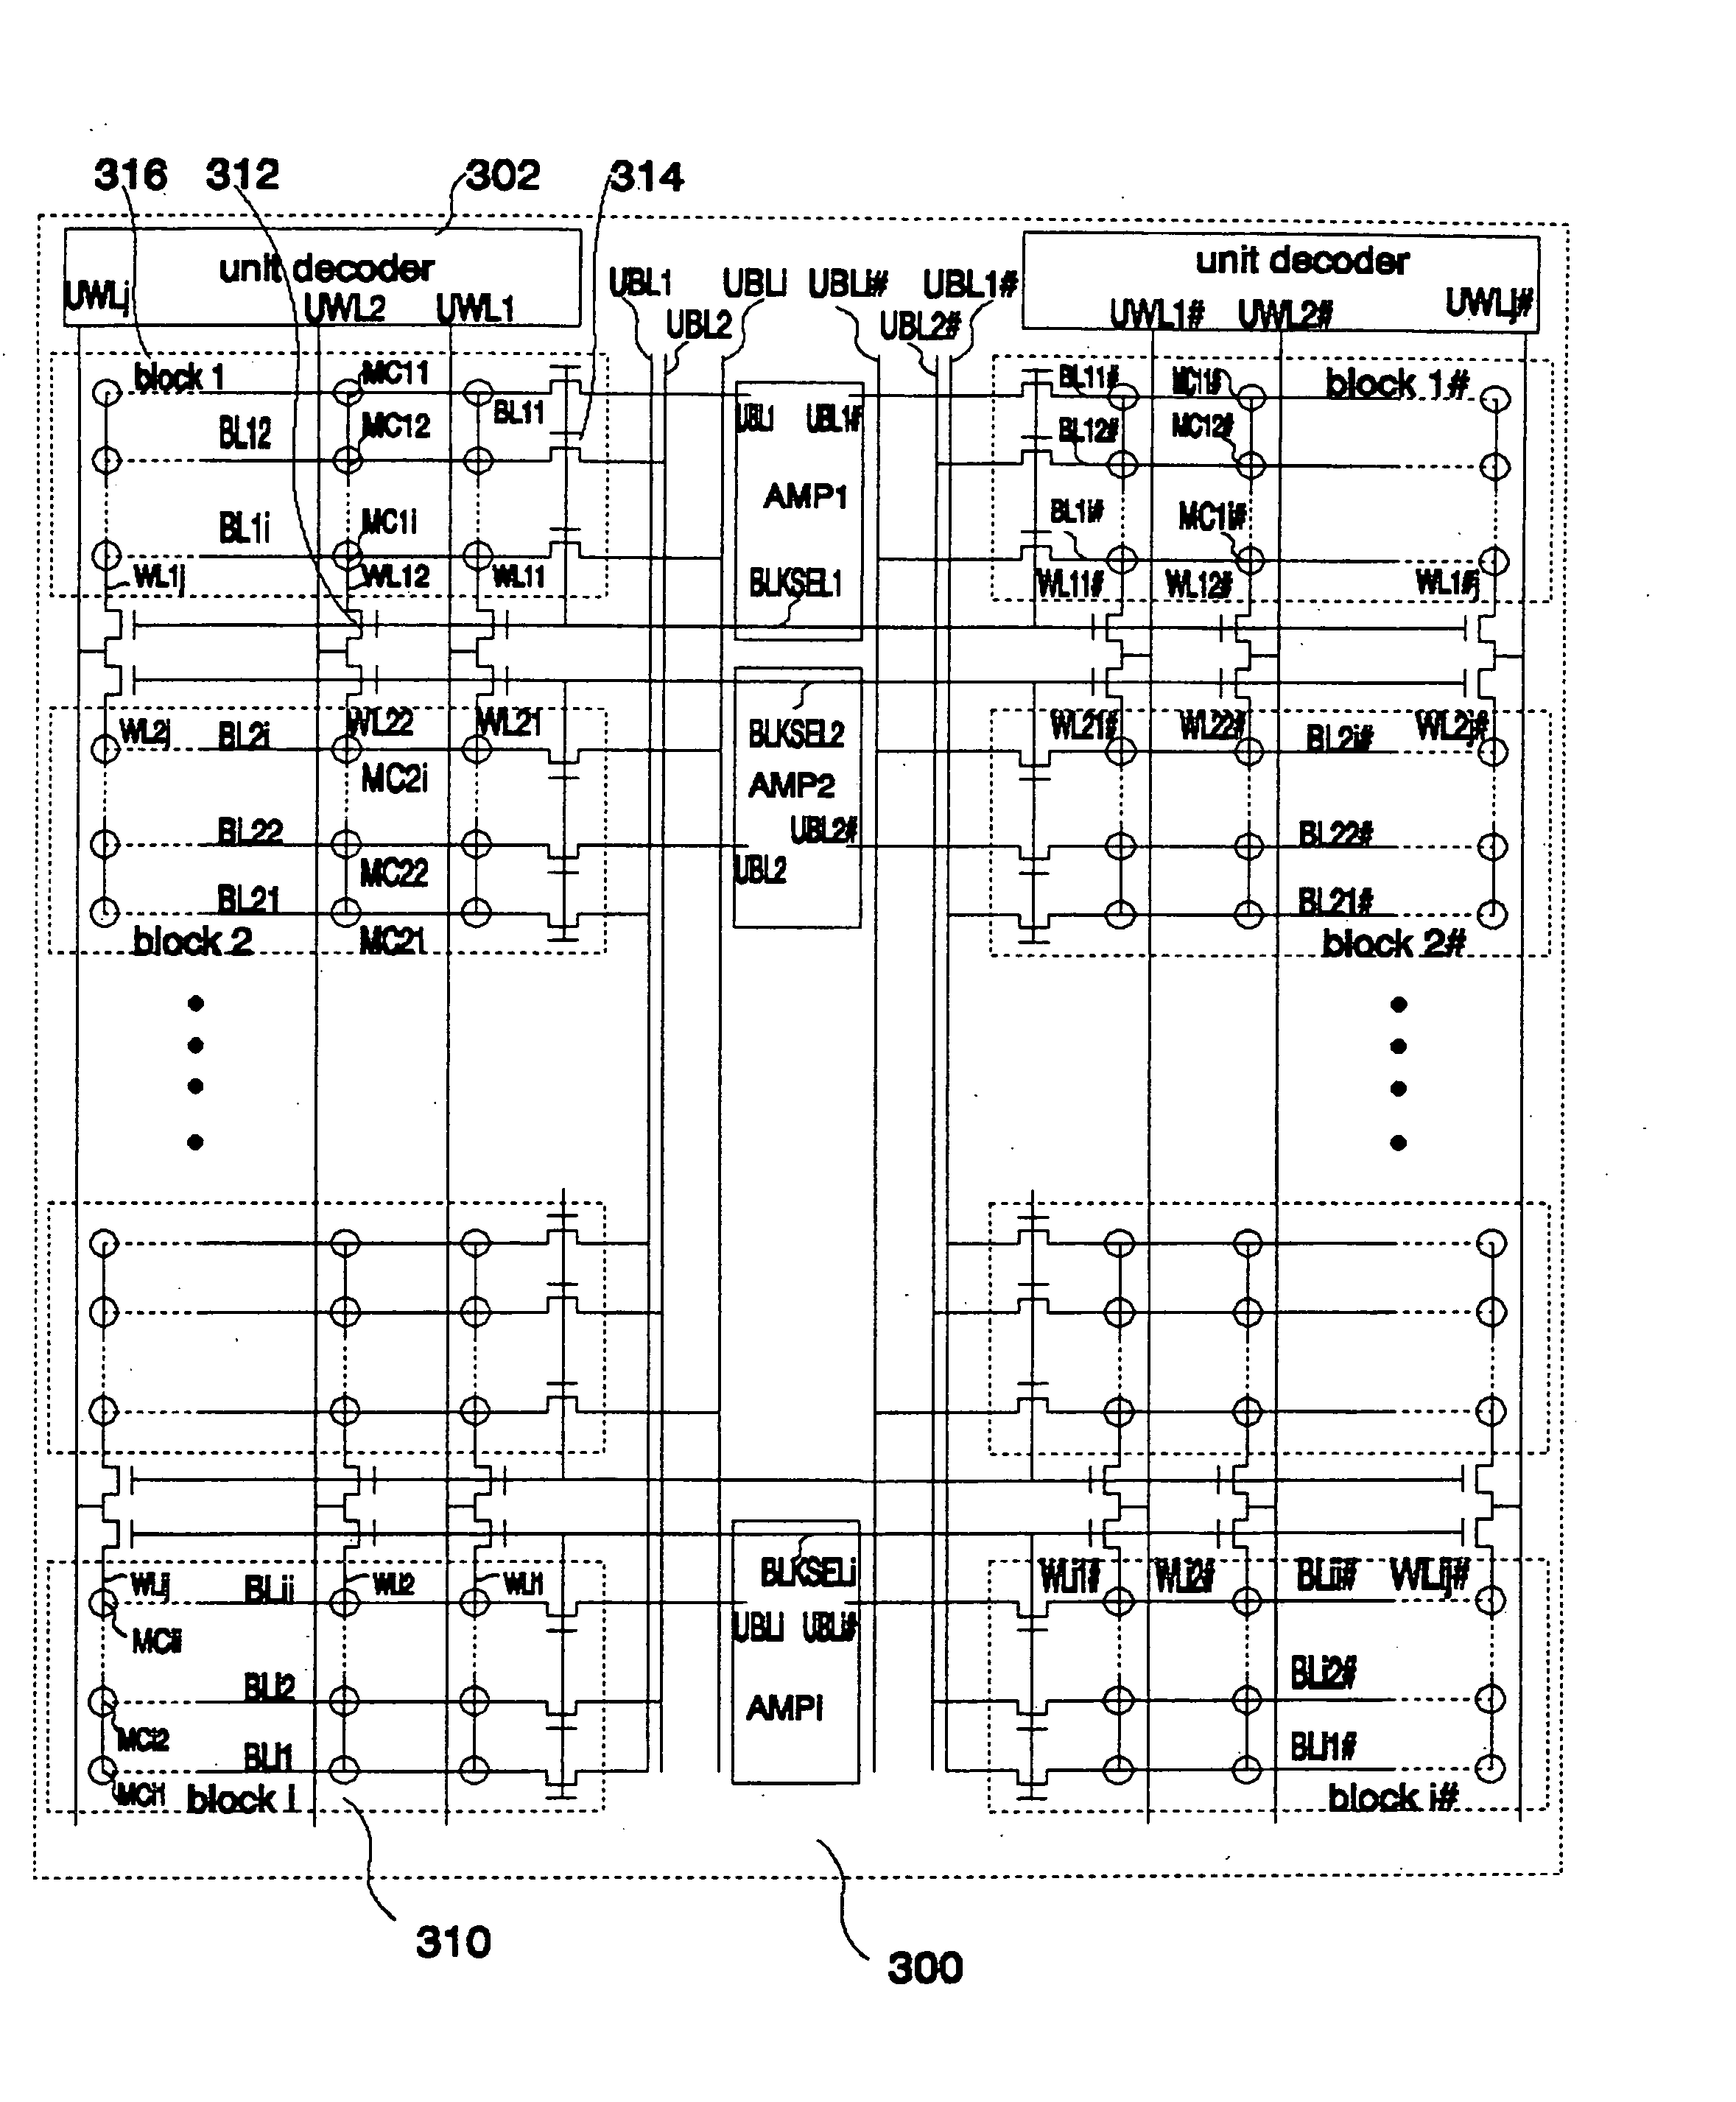 High performance embedded semiconductor memory devices with multiple dimension first-level bit-lines